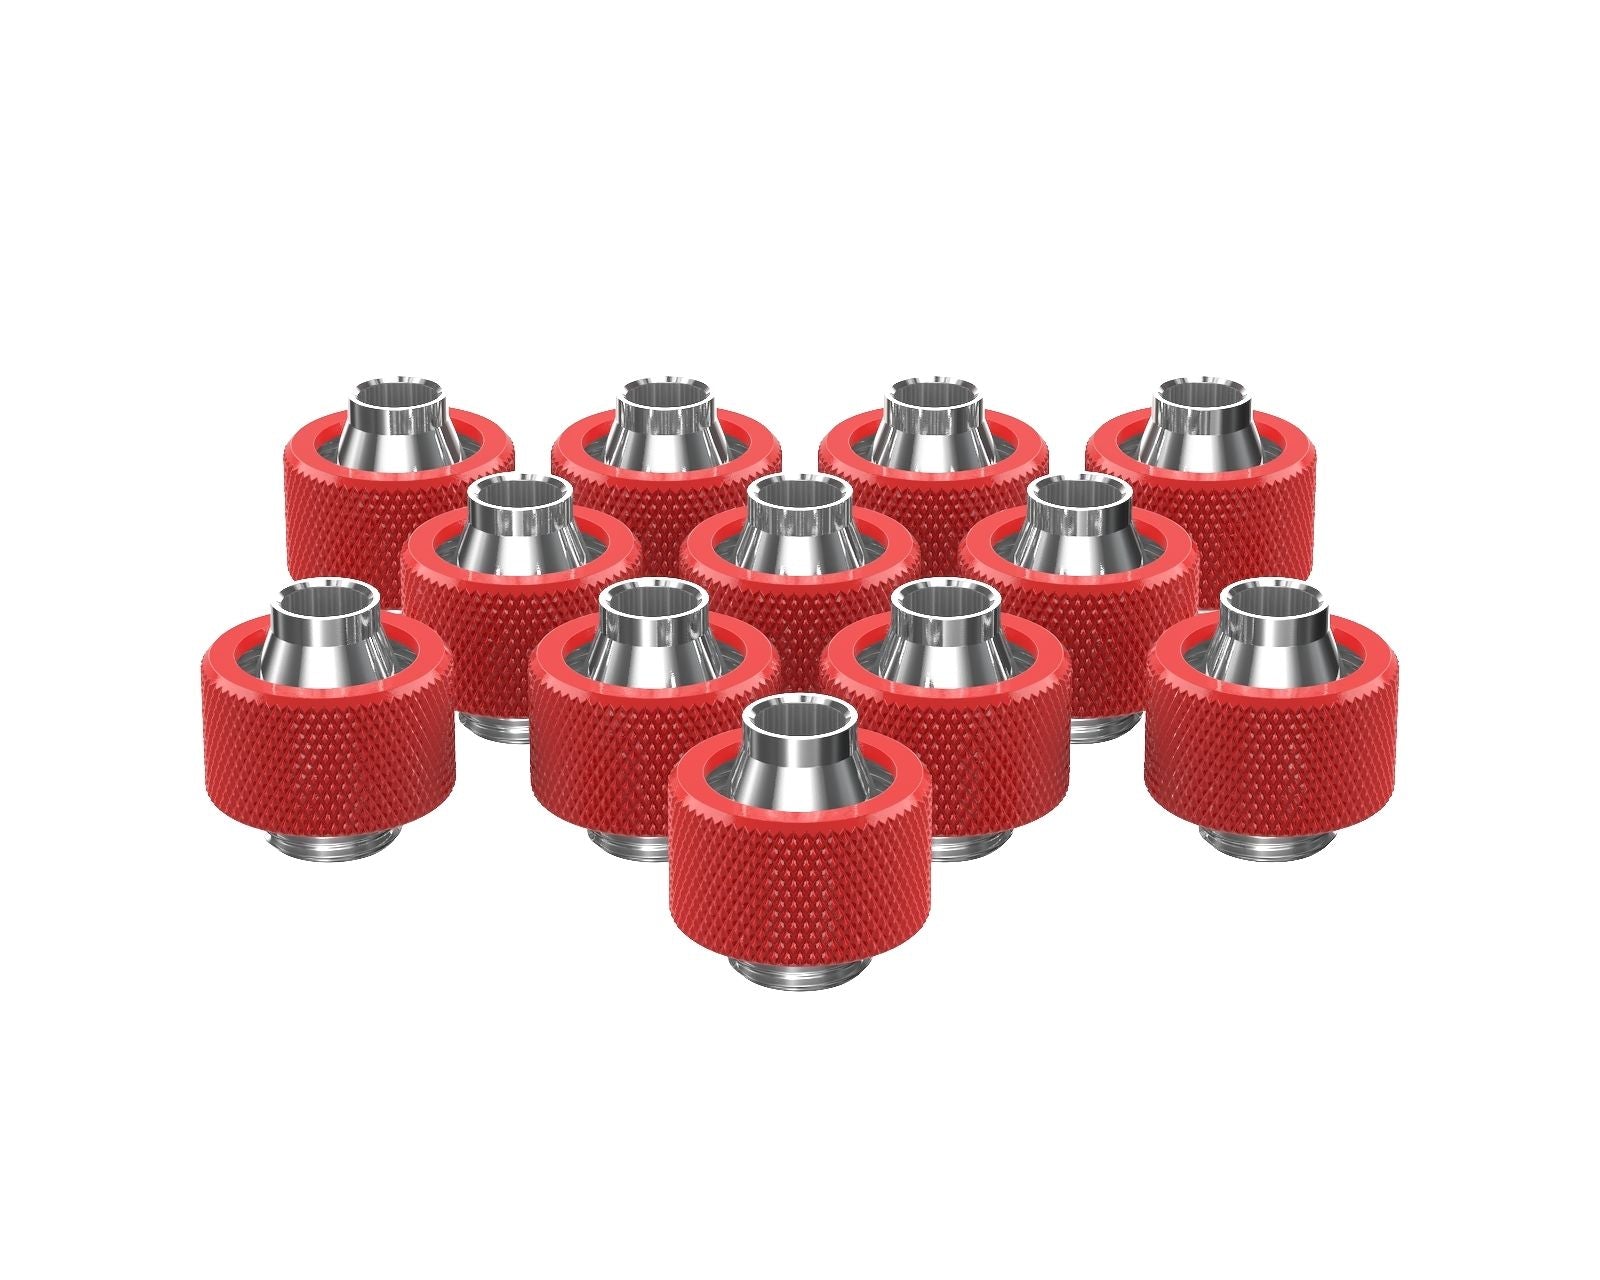 PrimoChill SecureFit SX - Premium Compression Fitting For 7/16in ID x 5/8in OD Flexible Tubing 12 Pack (F-SFSX758-12) - Available in 20+ Colors, Custom Watercooling Loop Ready - Razor Red